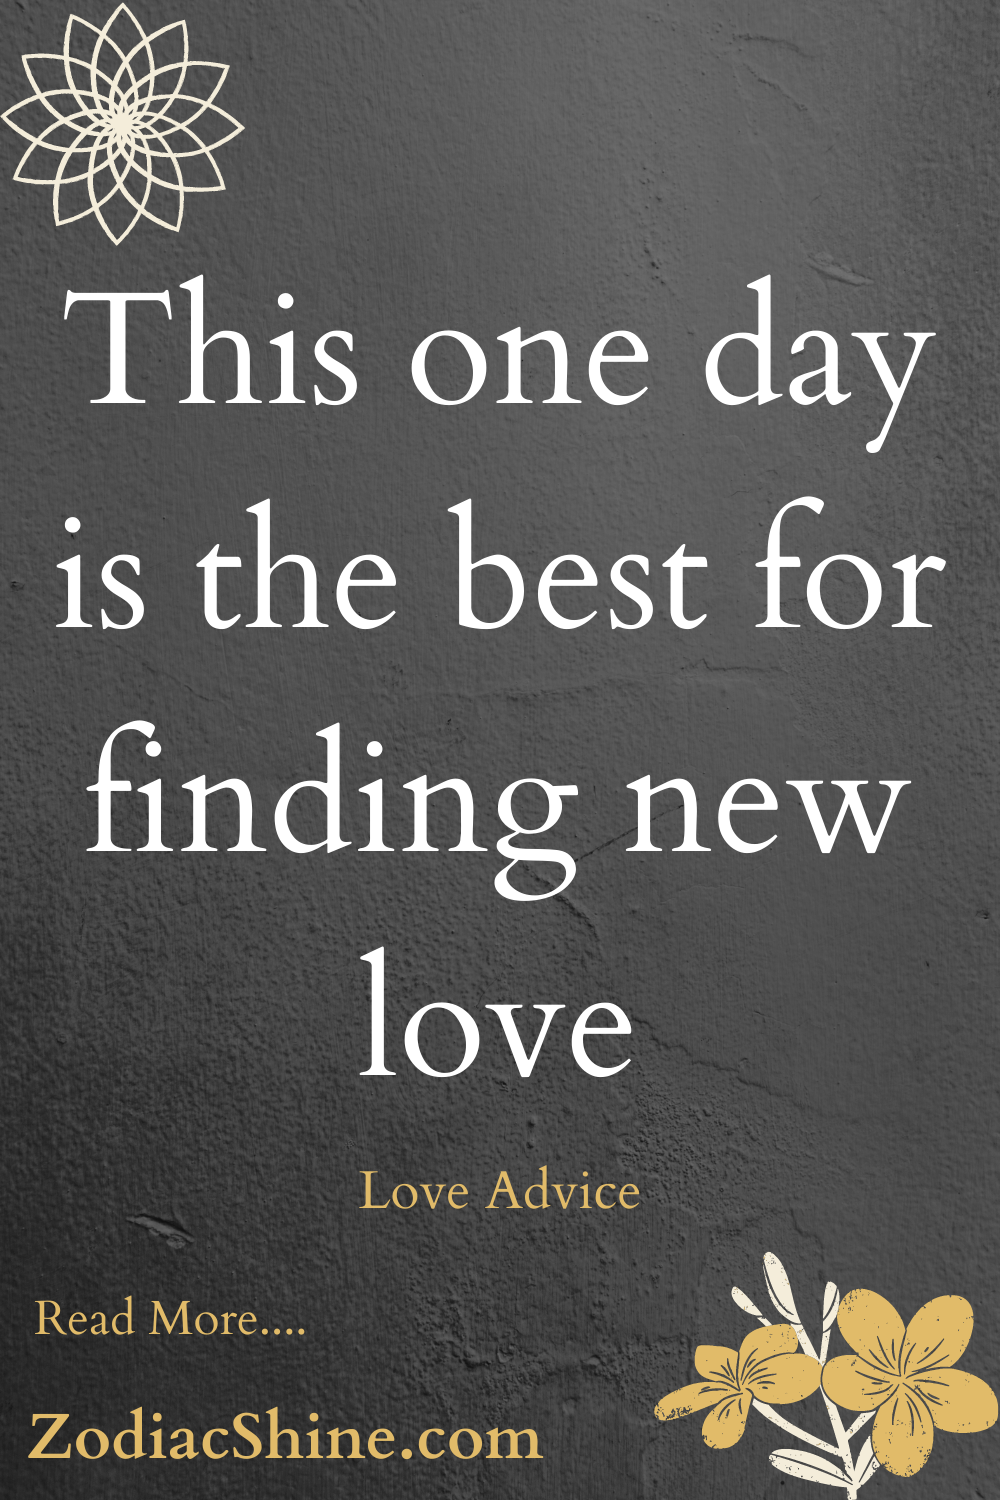 This one day is the best for finding new love